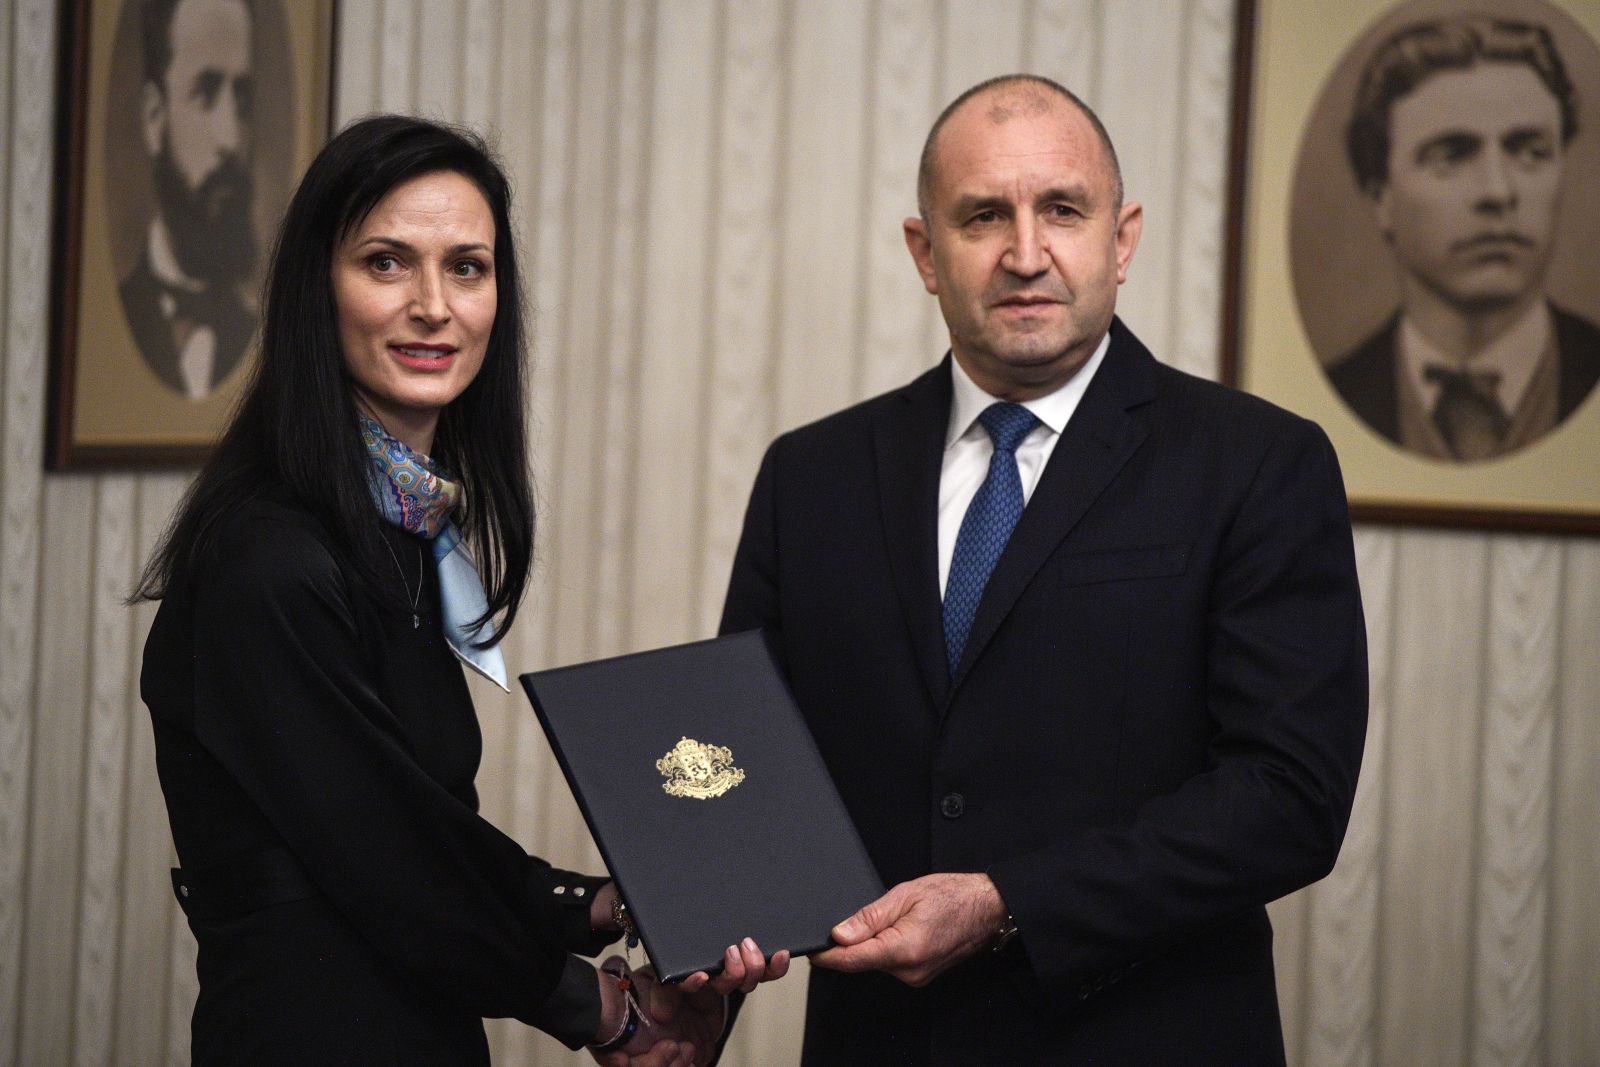 epa11227693 Bulgaria's Foreign Affairs Minister and GERB party's candidate for prime minister Mariya Gabriel (L) receives a mandate to form a new government from Bulgarian President Rumen Radev in Sofia, Bulgaria, 18 March 2024.  EPA/VASSIL DONEV